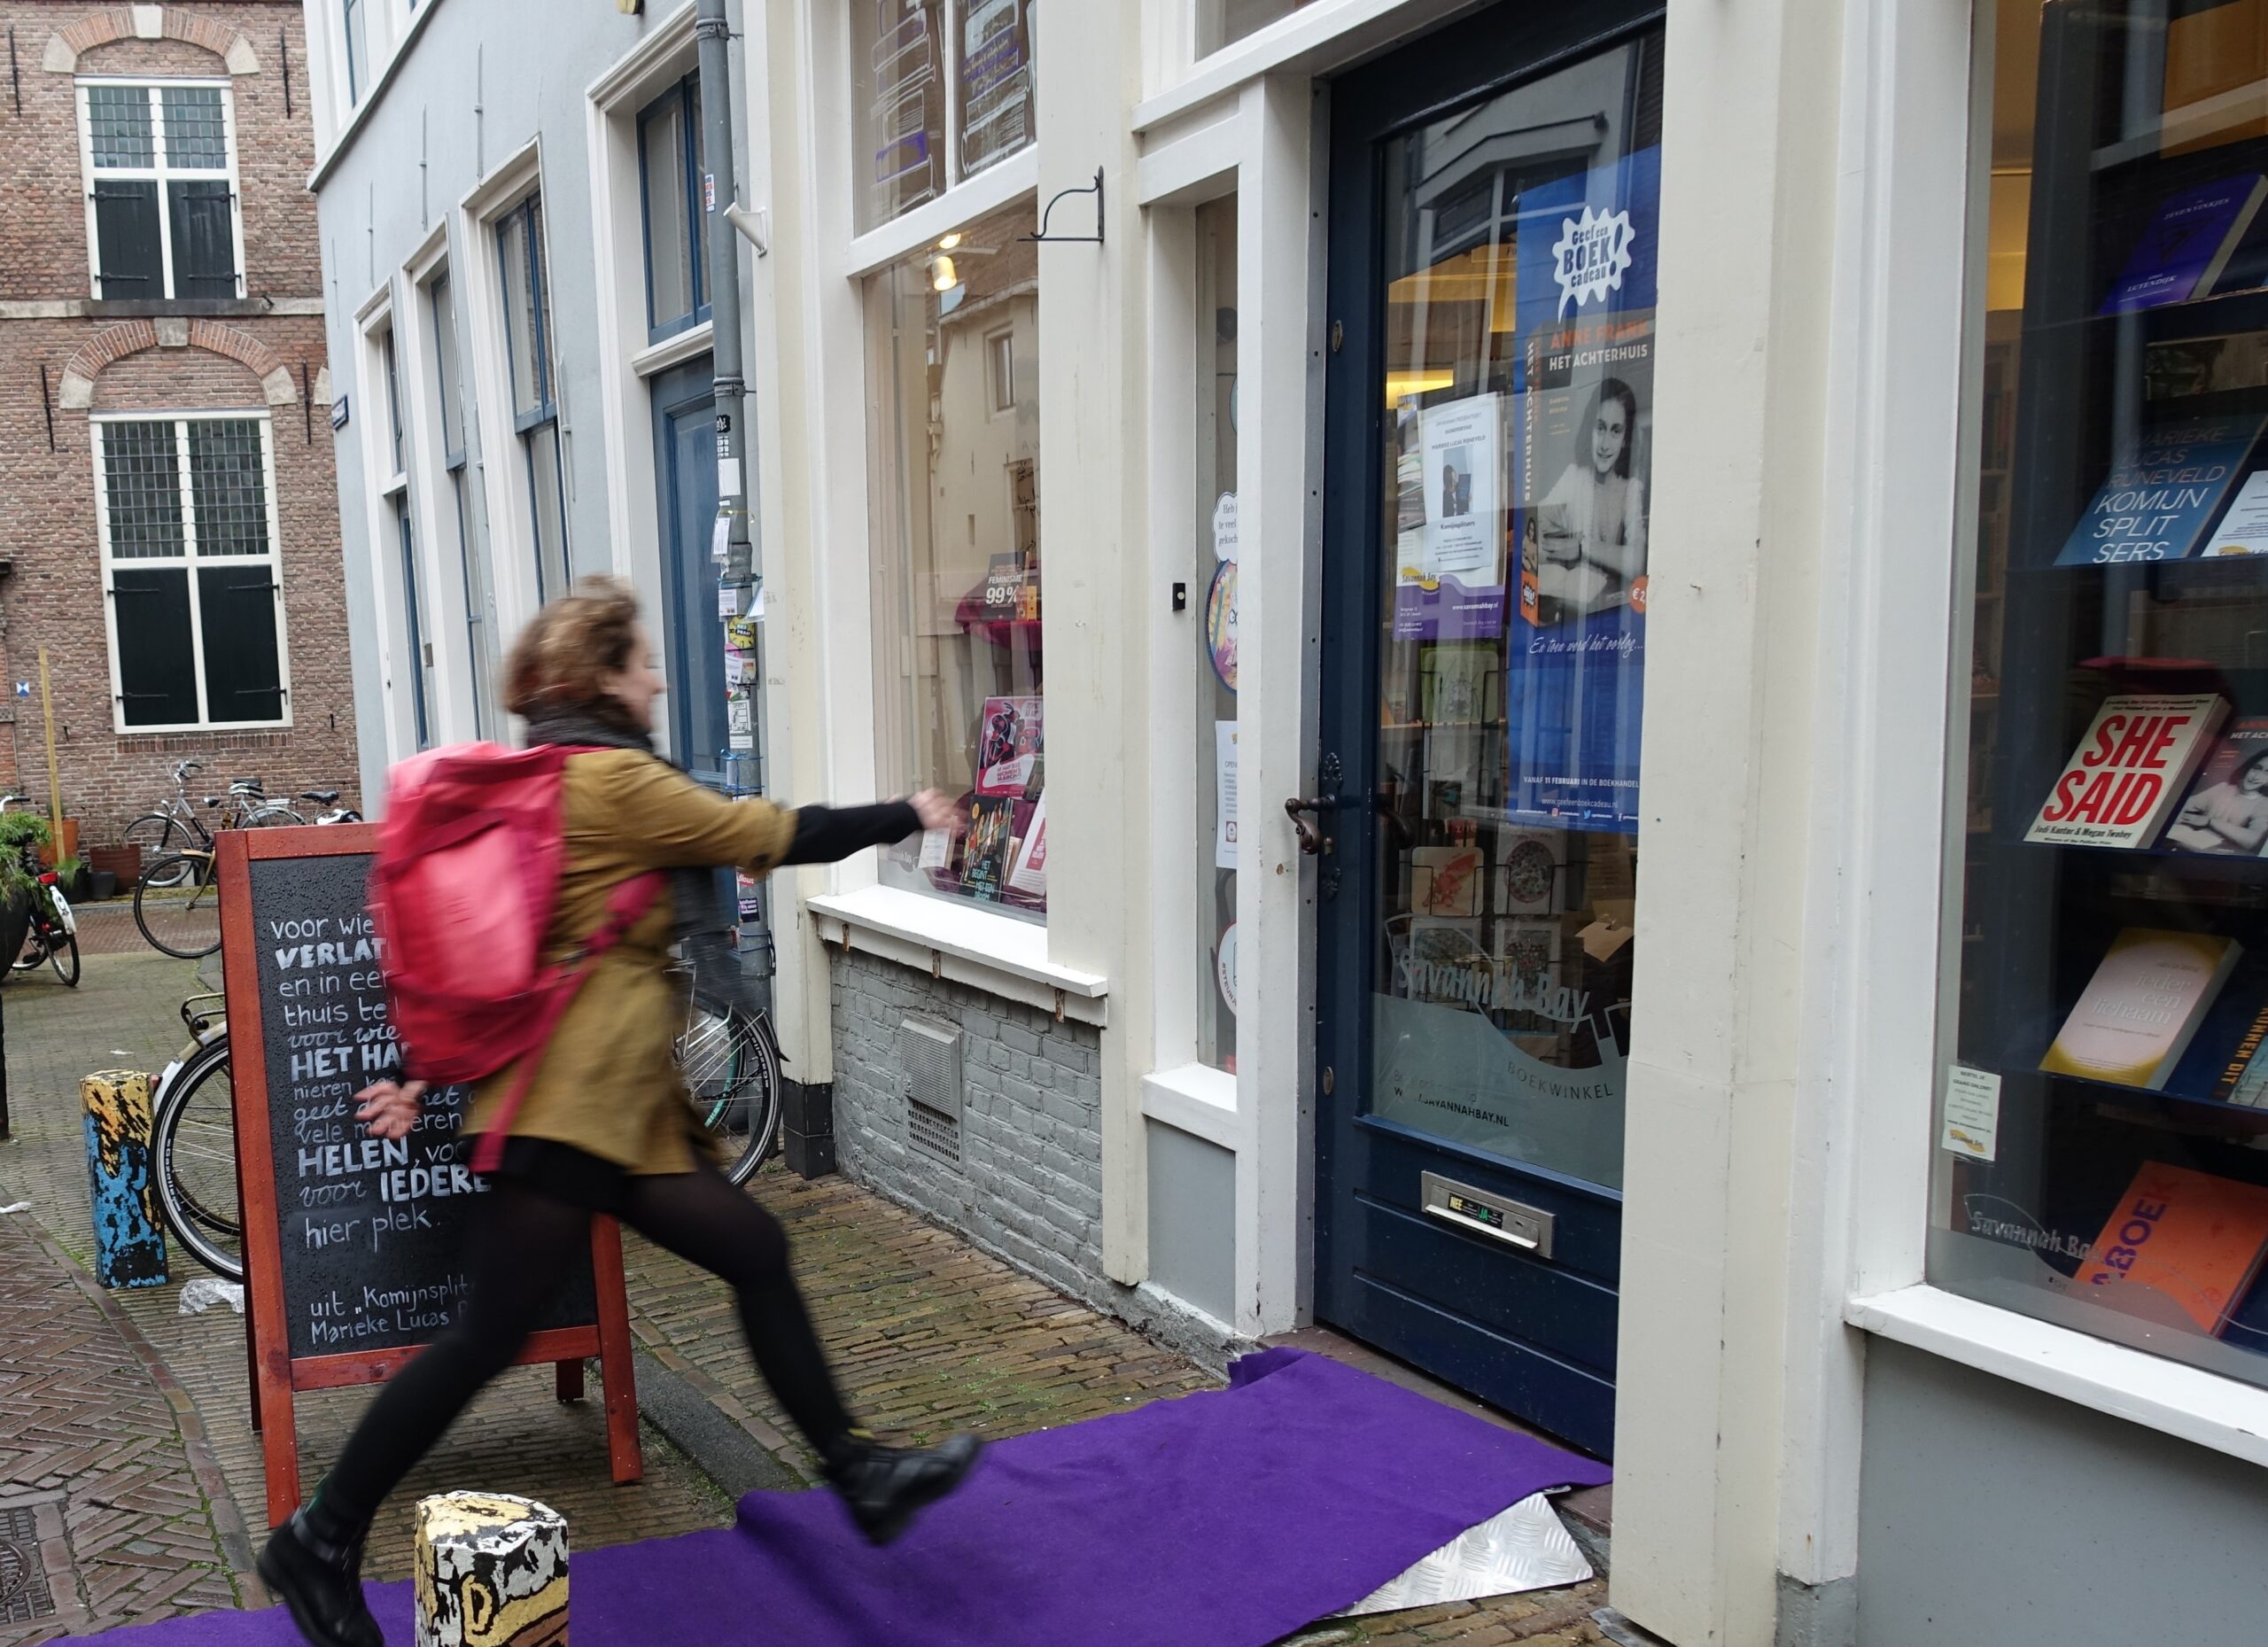 A young person is walking towards the Savannah Bay bookshop. They are shown to be walking at brisk speed and with purpose, just stepping onto a purple carpet, a couple of feet from the door. The door of the bookshop has a wooden, dark blue frame, with glass in the middle. On both side of the door are windows that are displaying books.